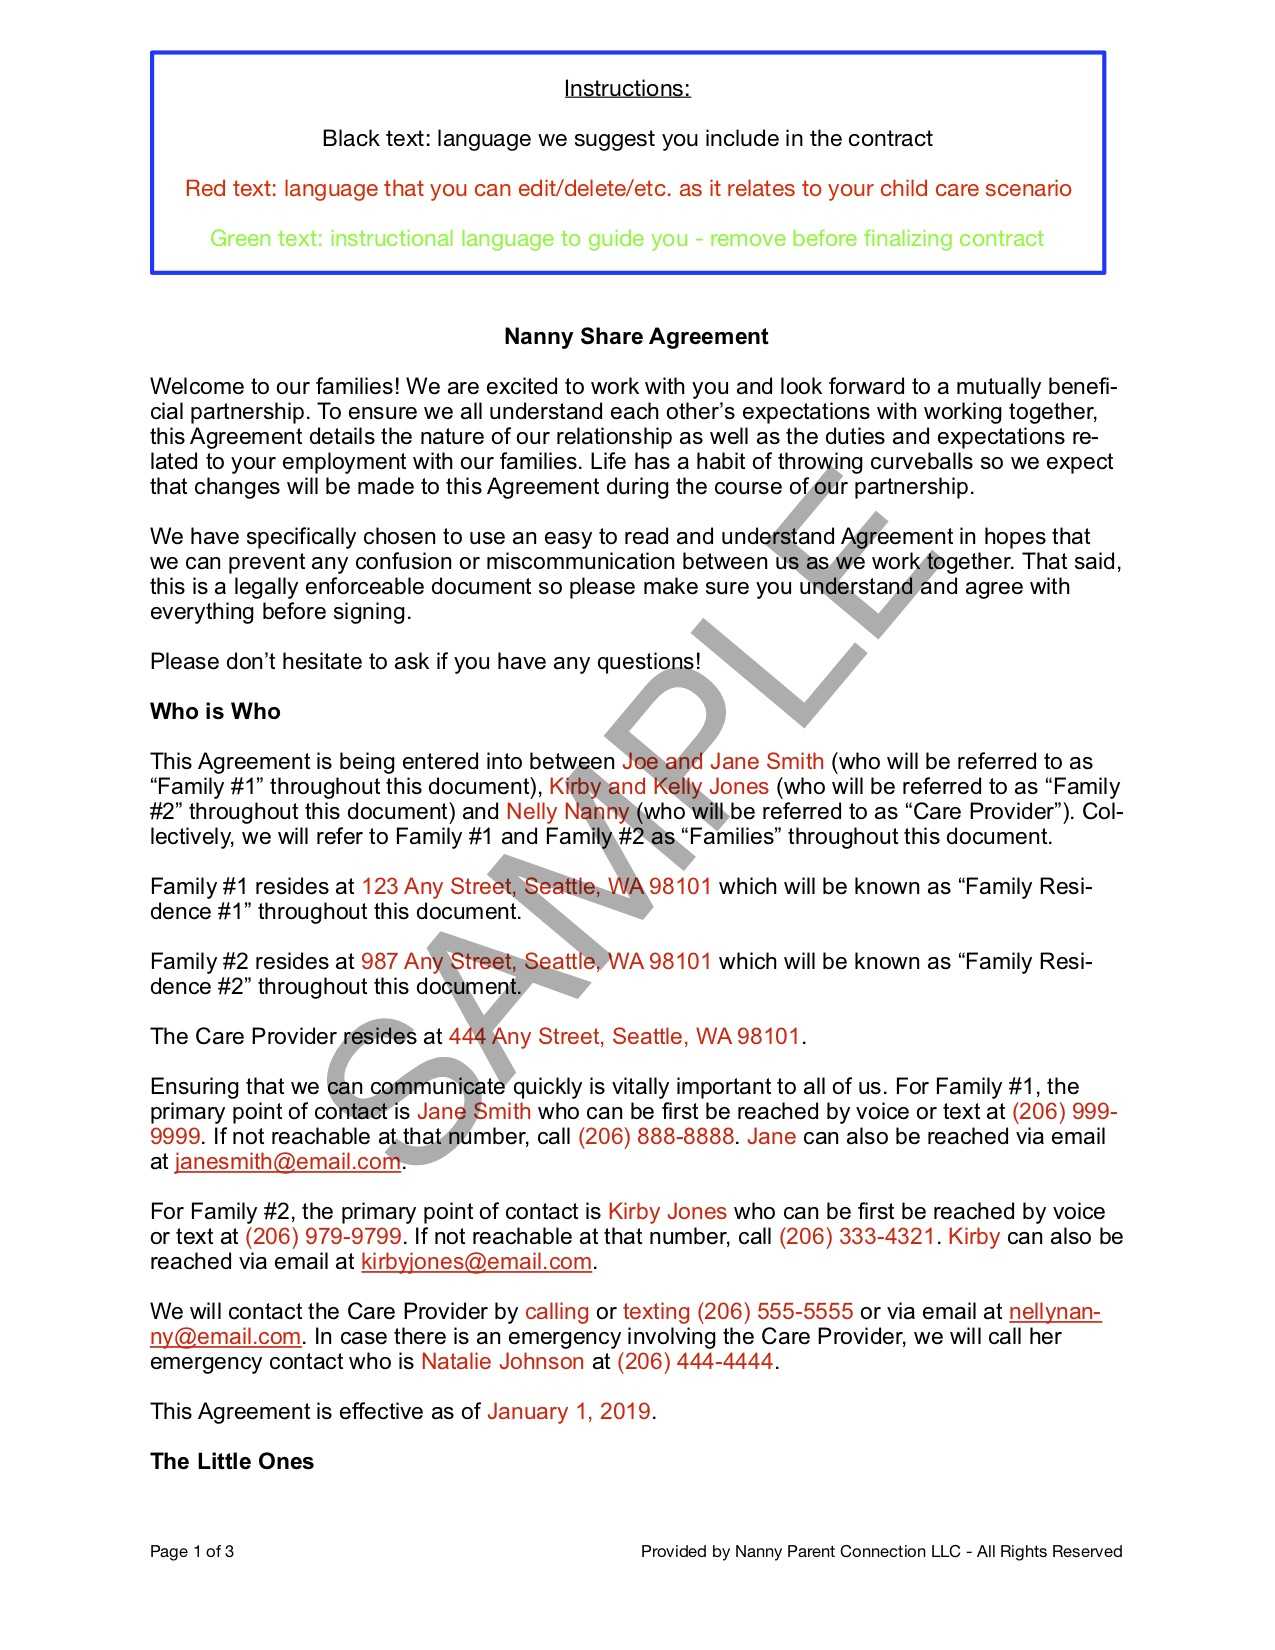 Easy To Understand" Nanny Share Contract | Nanny Parent Inside Nanny Contract Template Word